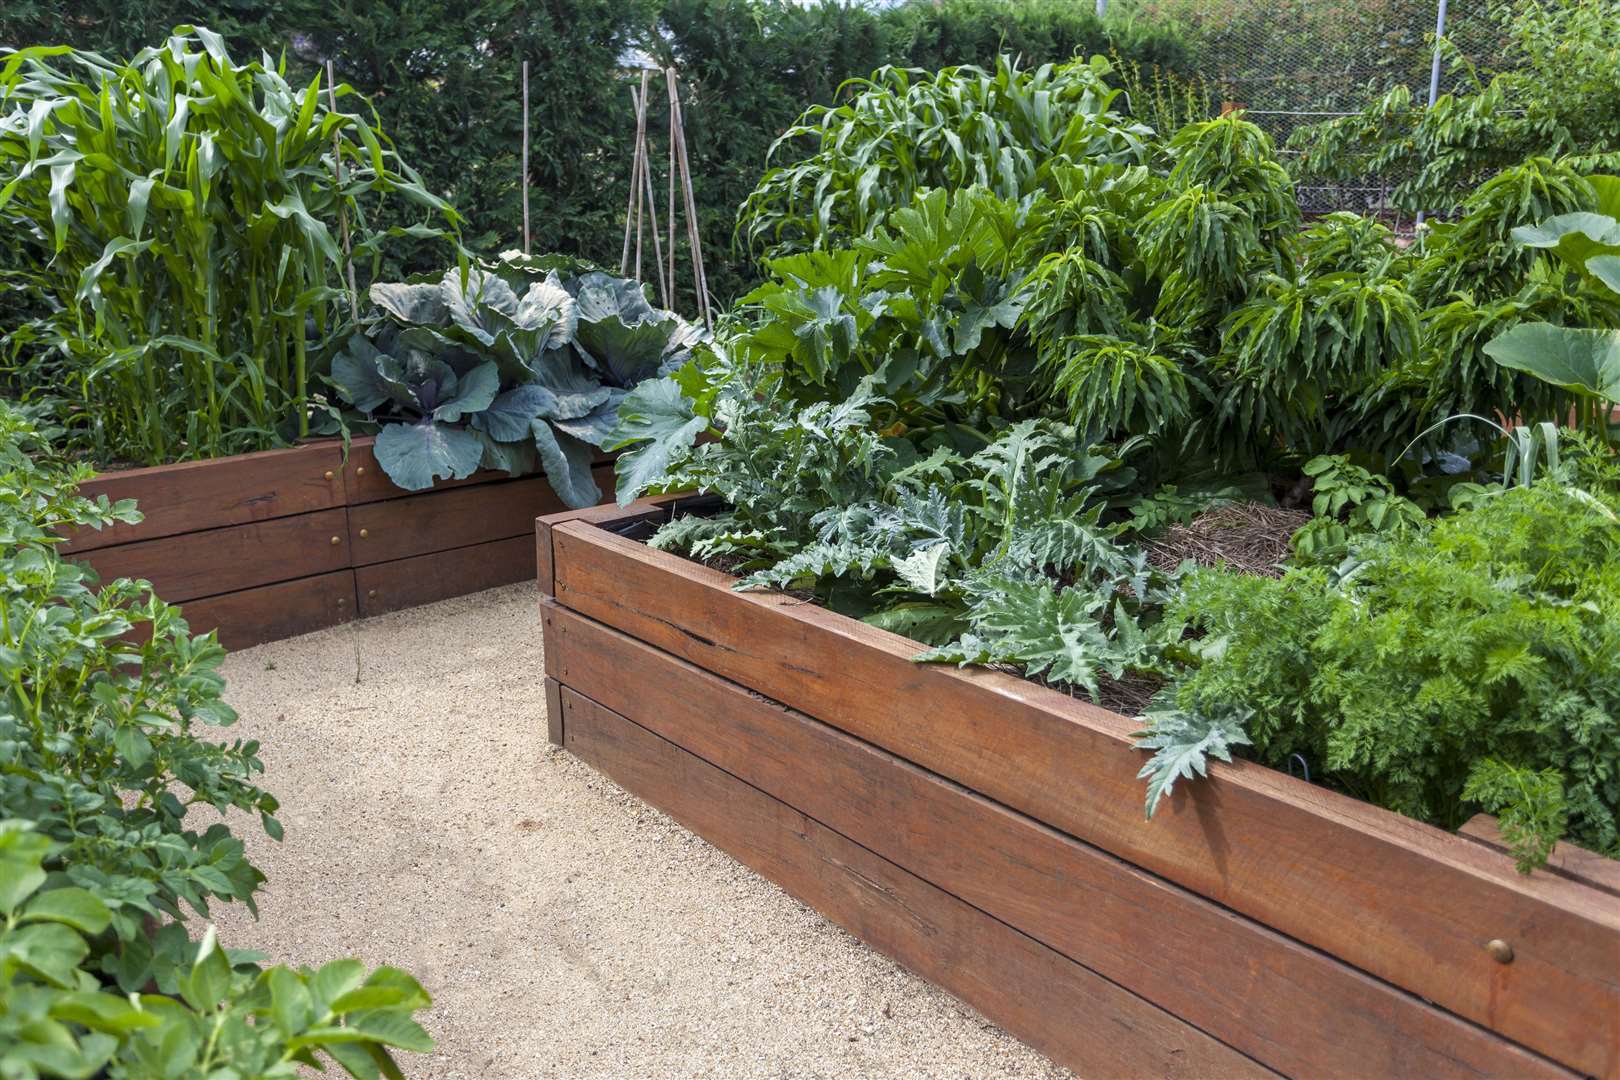 Create raised beds. Picture: iStock/PA